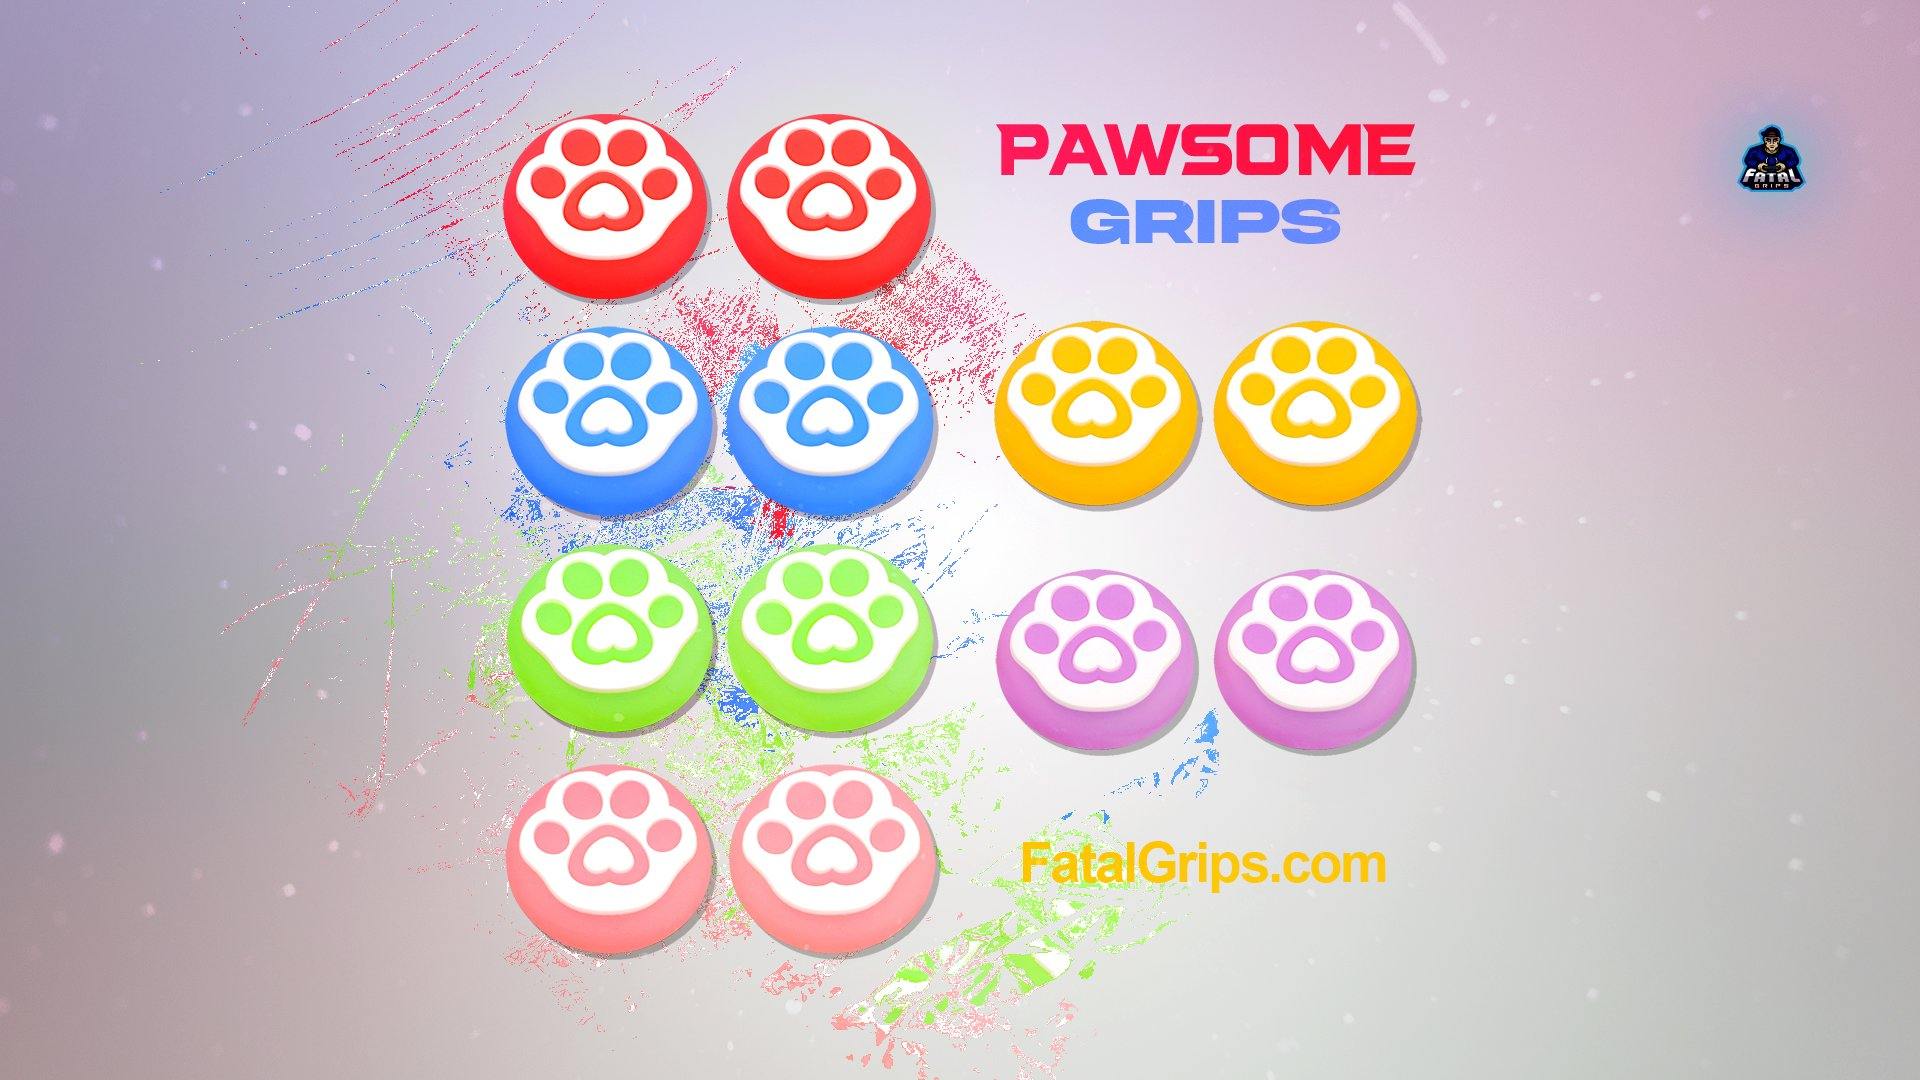 Pawsome Grips - Fatal Grips